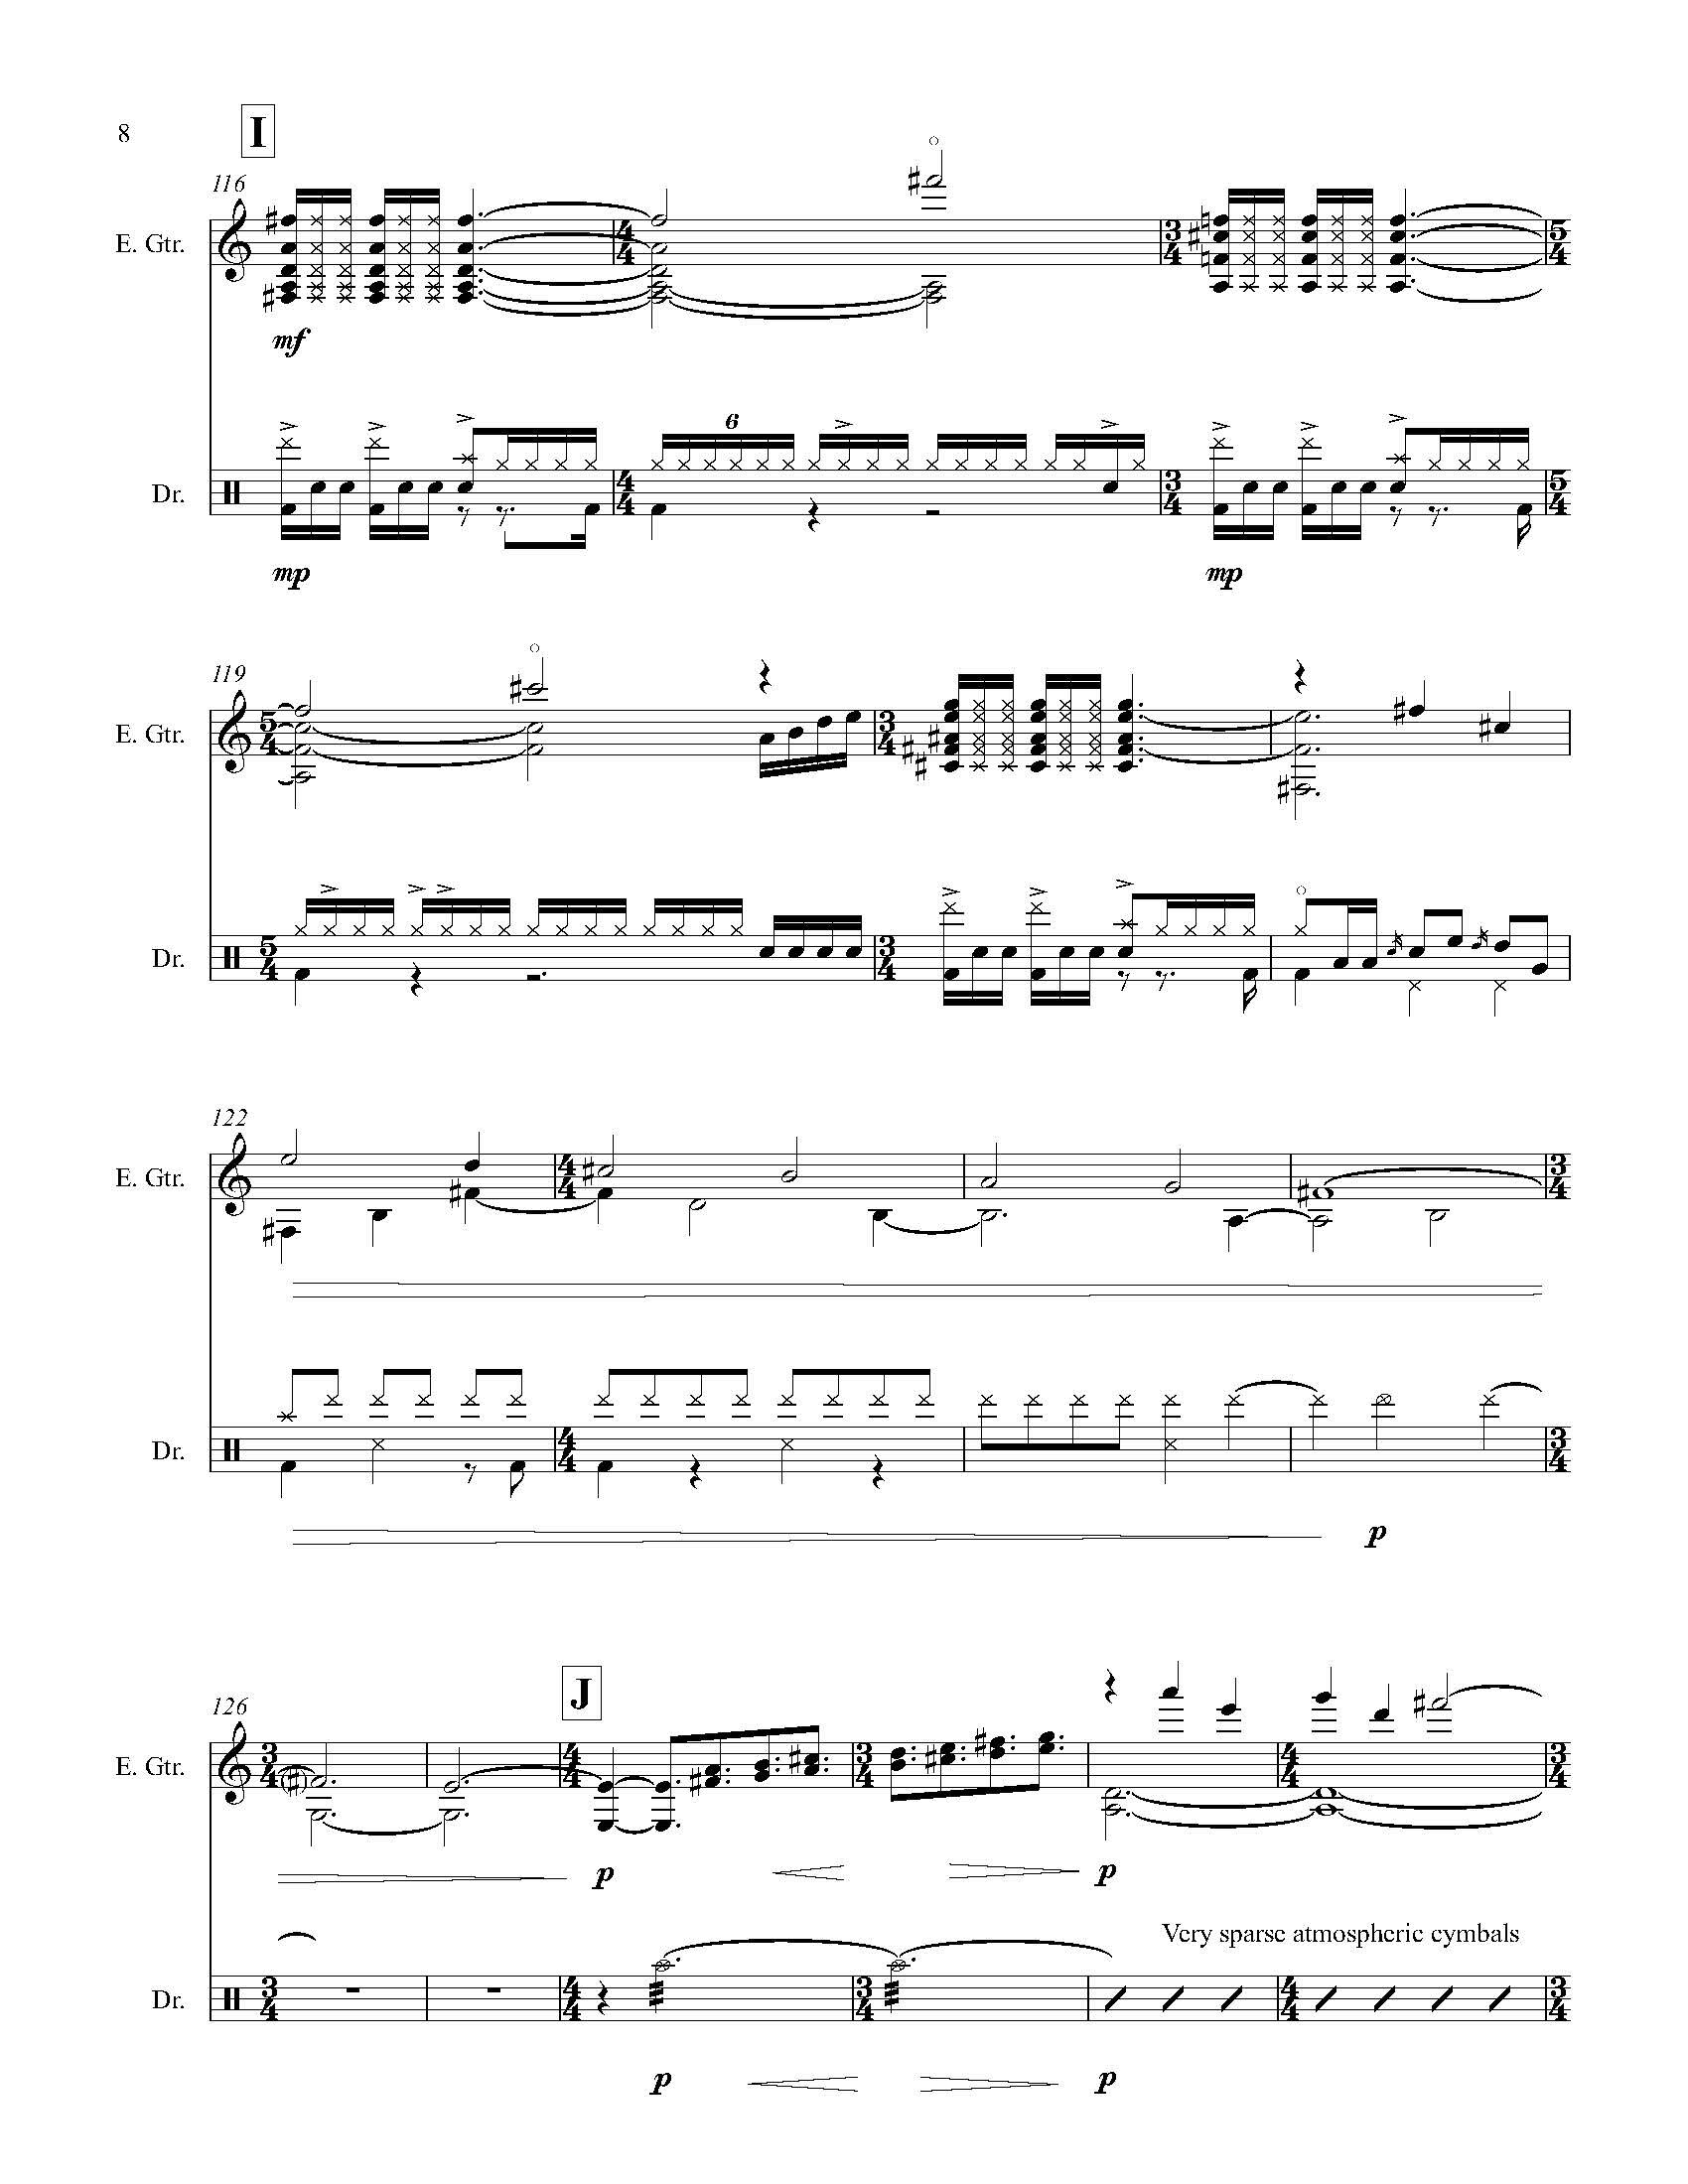 Atoms - Complete Score_Page_14.jpg